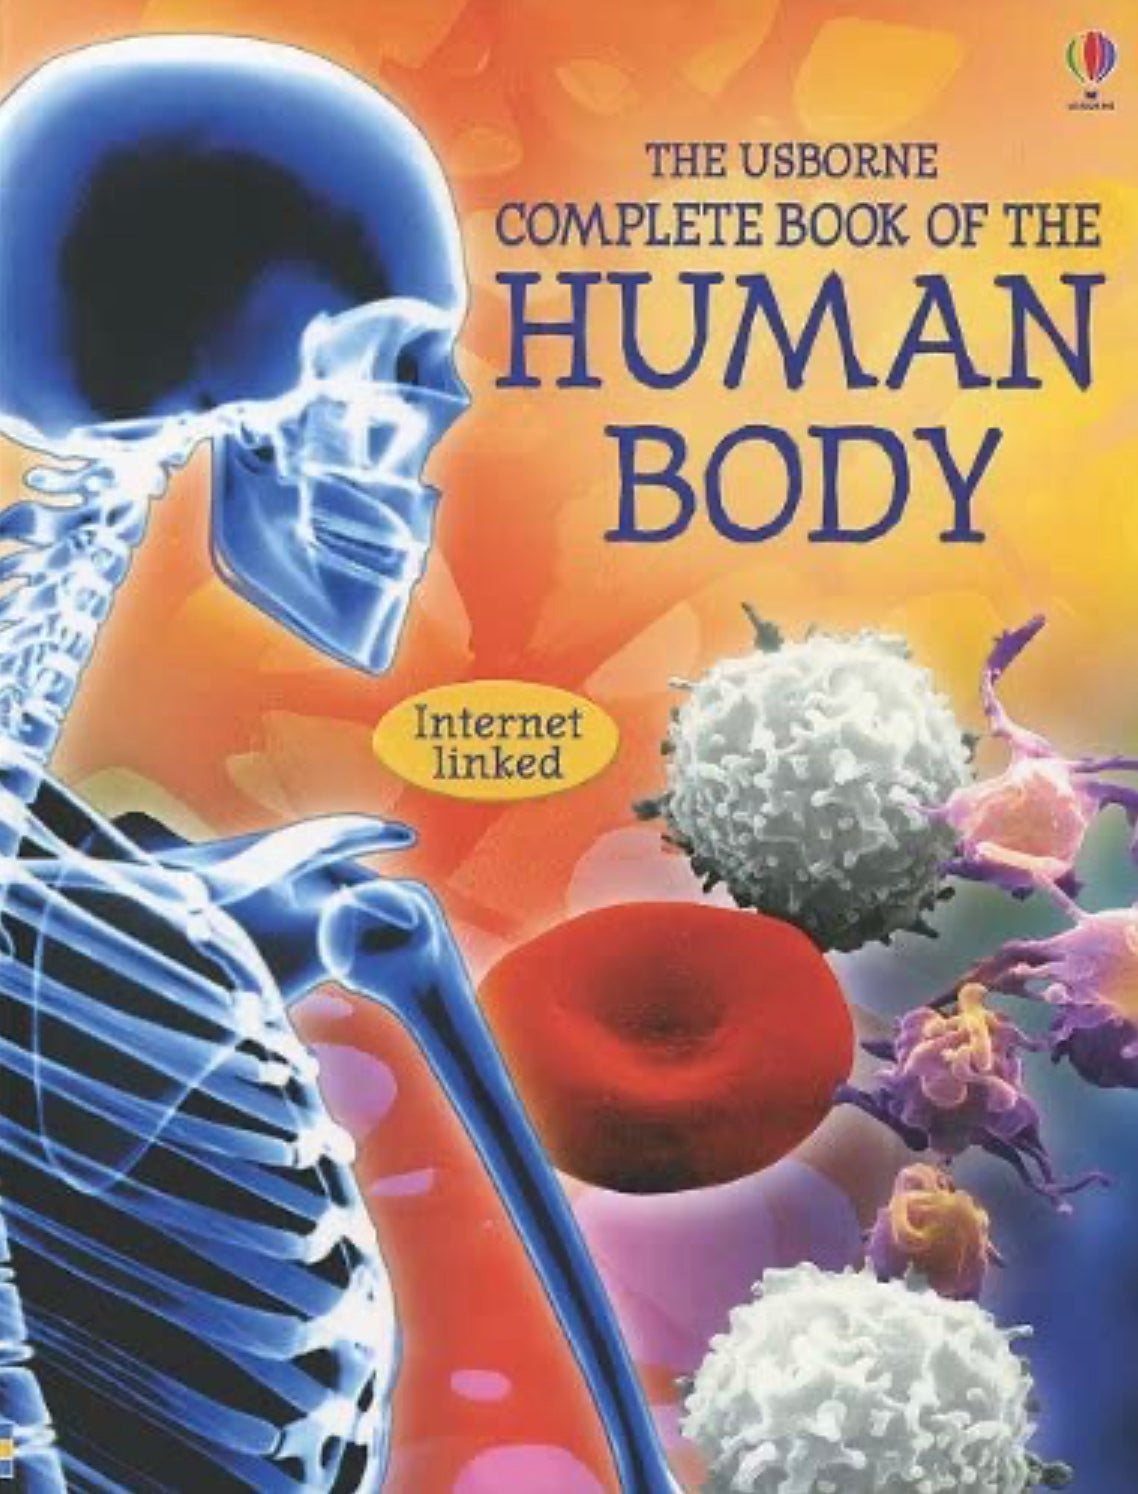 The Usborne complete book of the human body